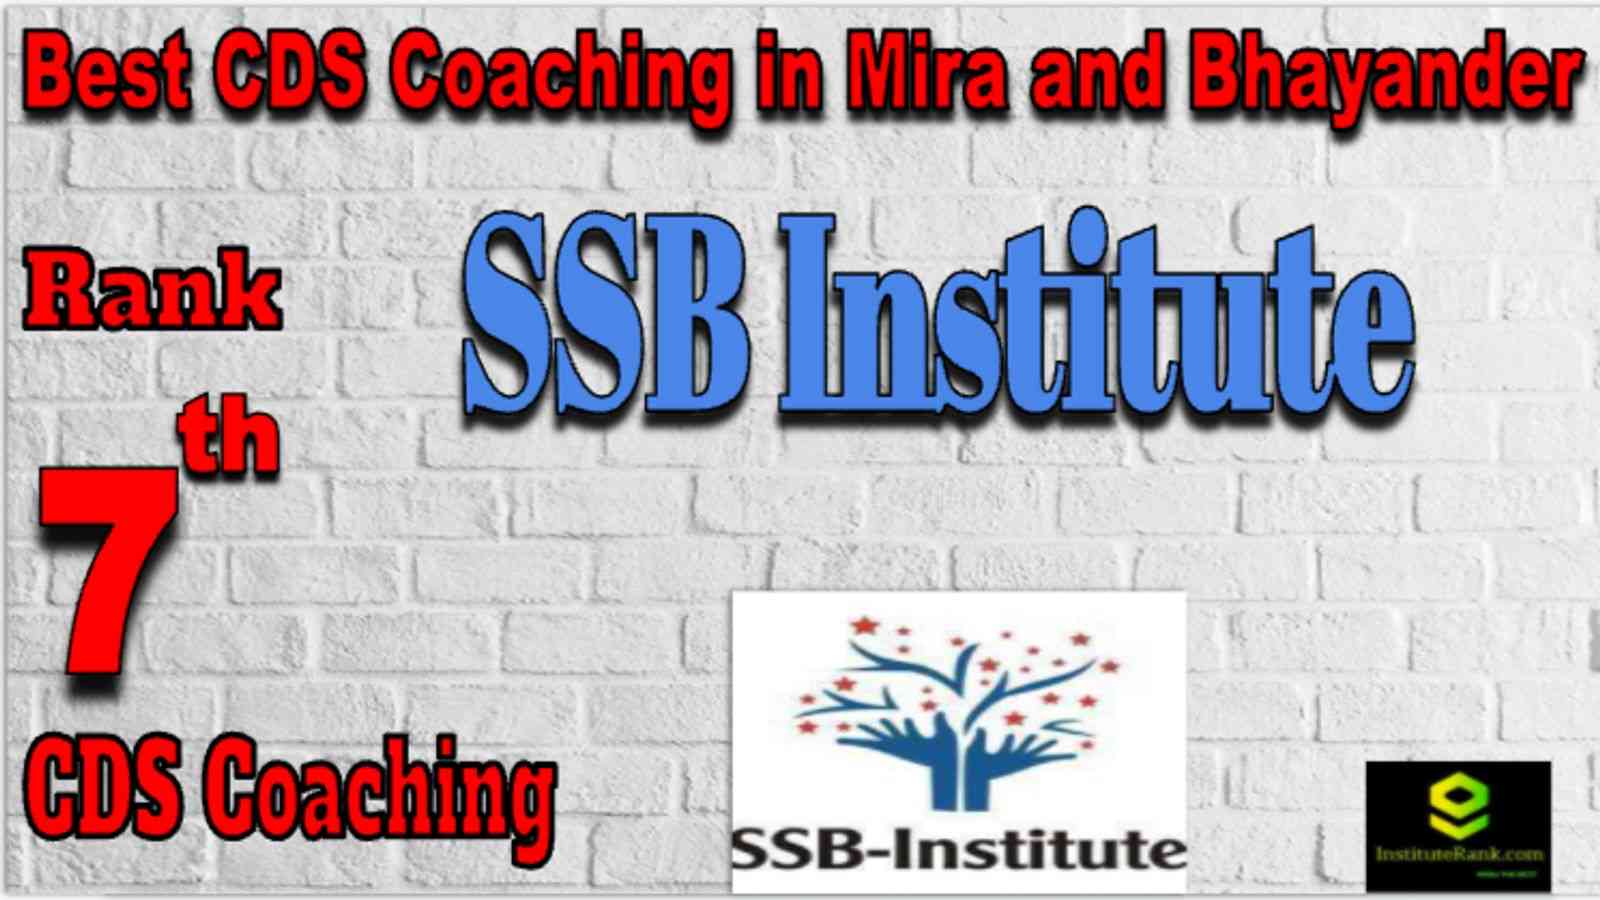 Rank 7 Best CDS Coaching in Mira and Bhayander